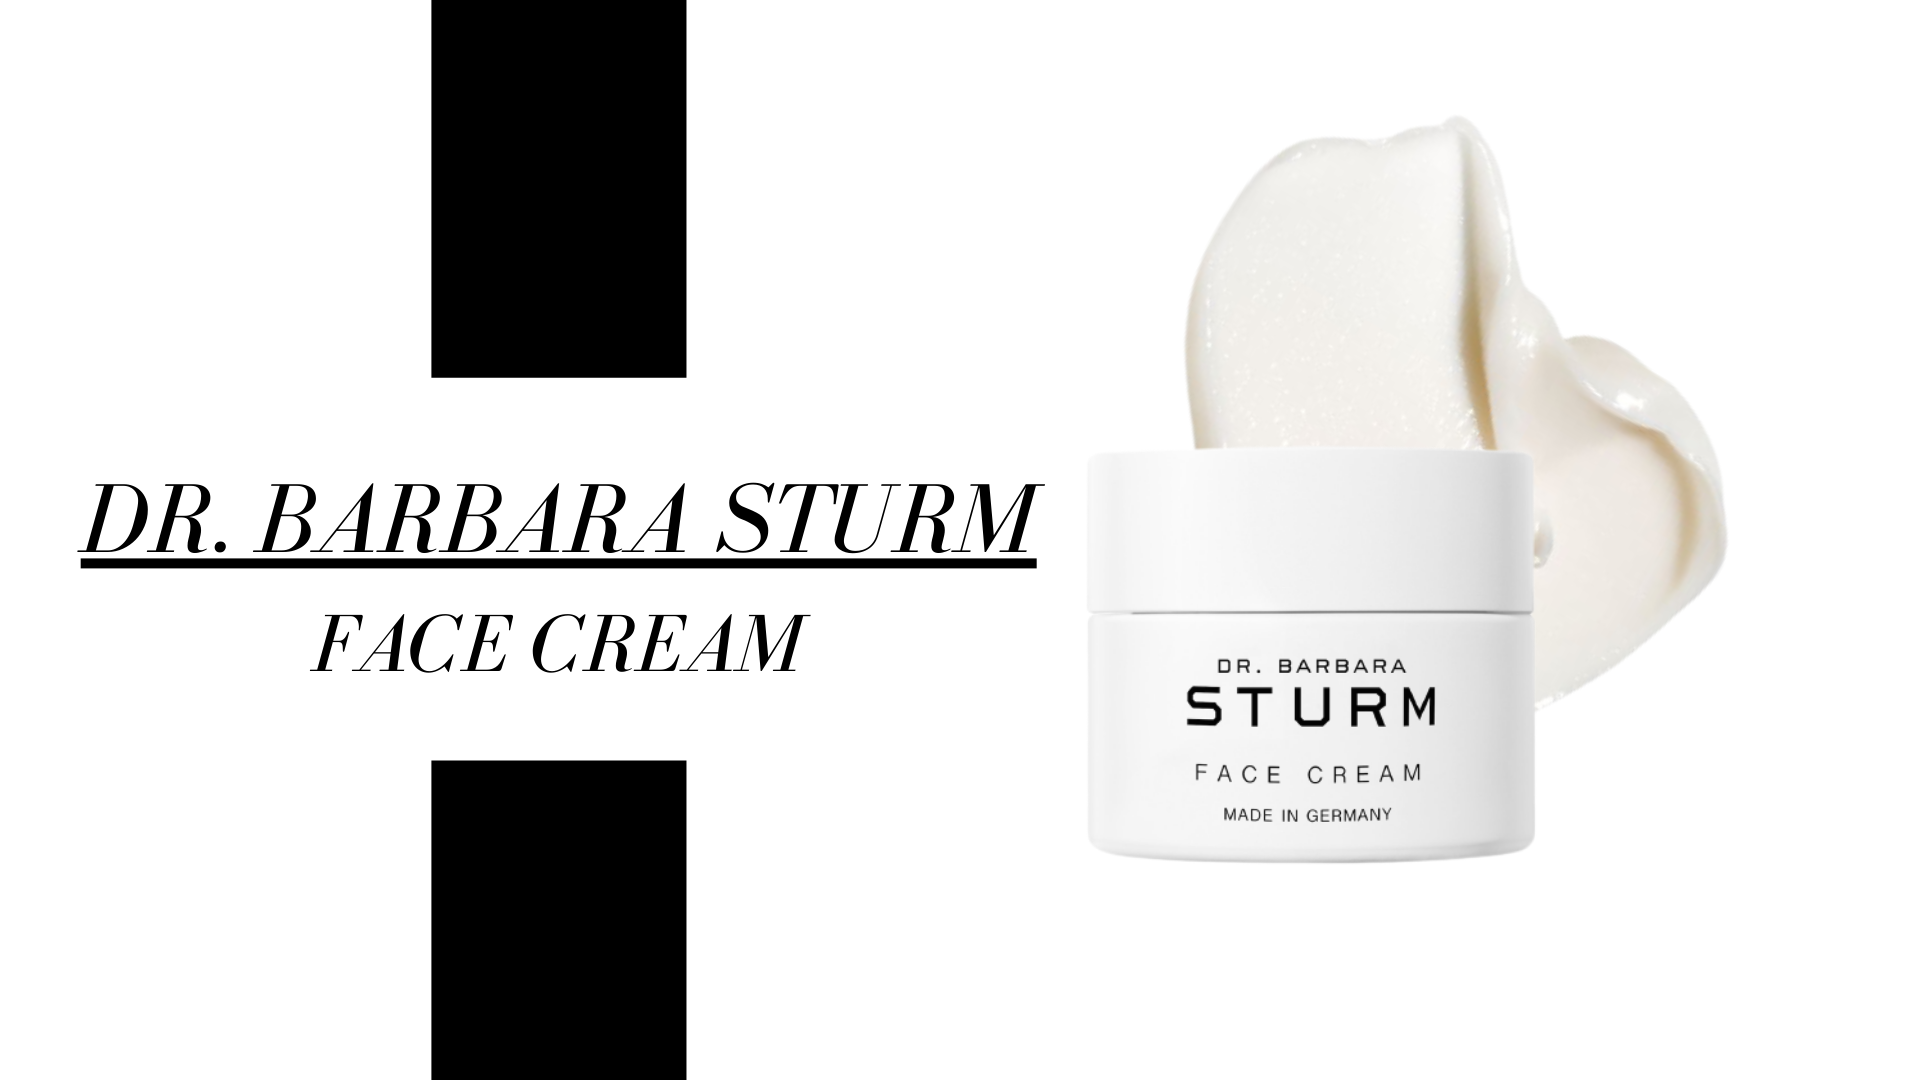 This moisturizer from Dr. Barbara Sturm is such an effective and complete product. First of all, it is suited for normal, dry, combination, and oily skin, which is always excellent! However, that is not the best part about this amazing cream! It is the fact that it is soothing and targets anti-aging like no other!